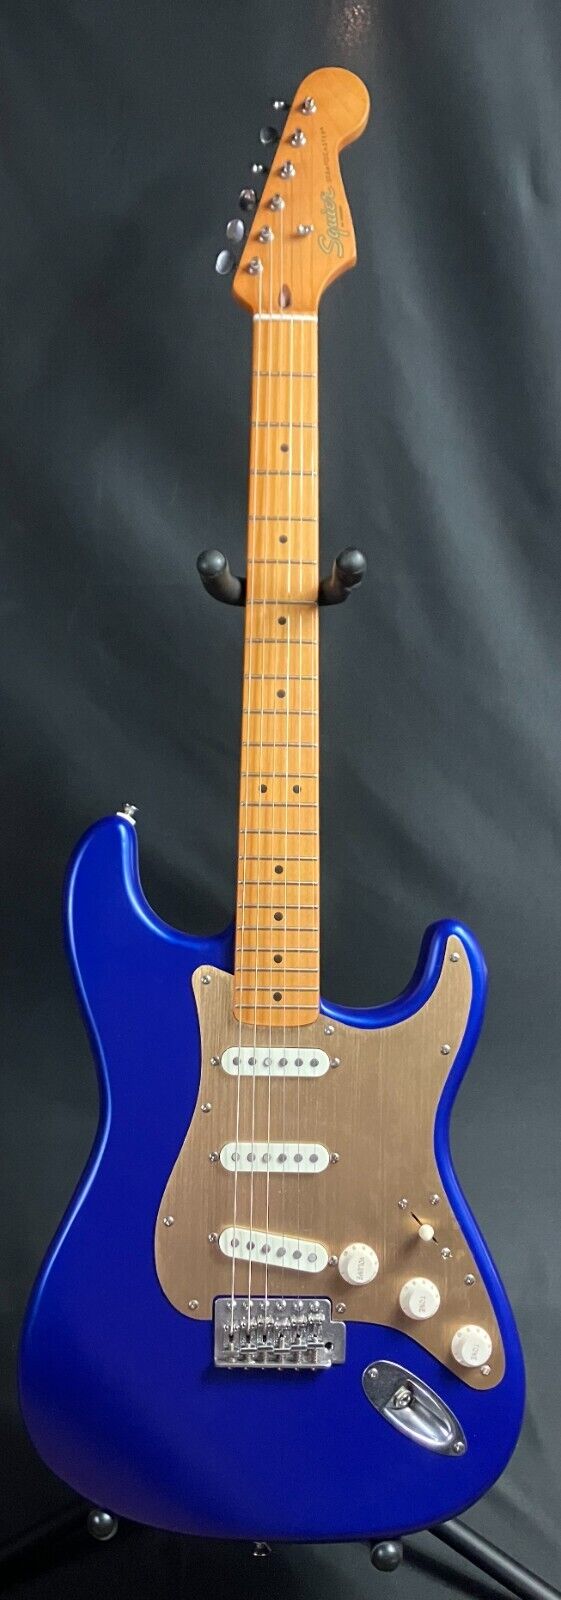 Squier 40th Anniversary Vintage Edition Stratocaster Electric Guitar Satin Blue